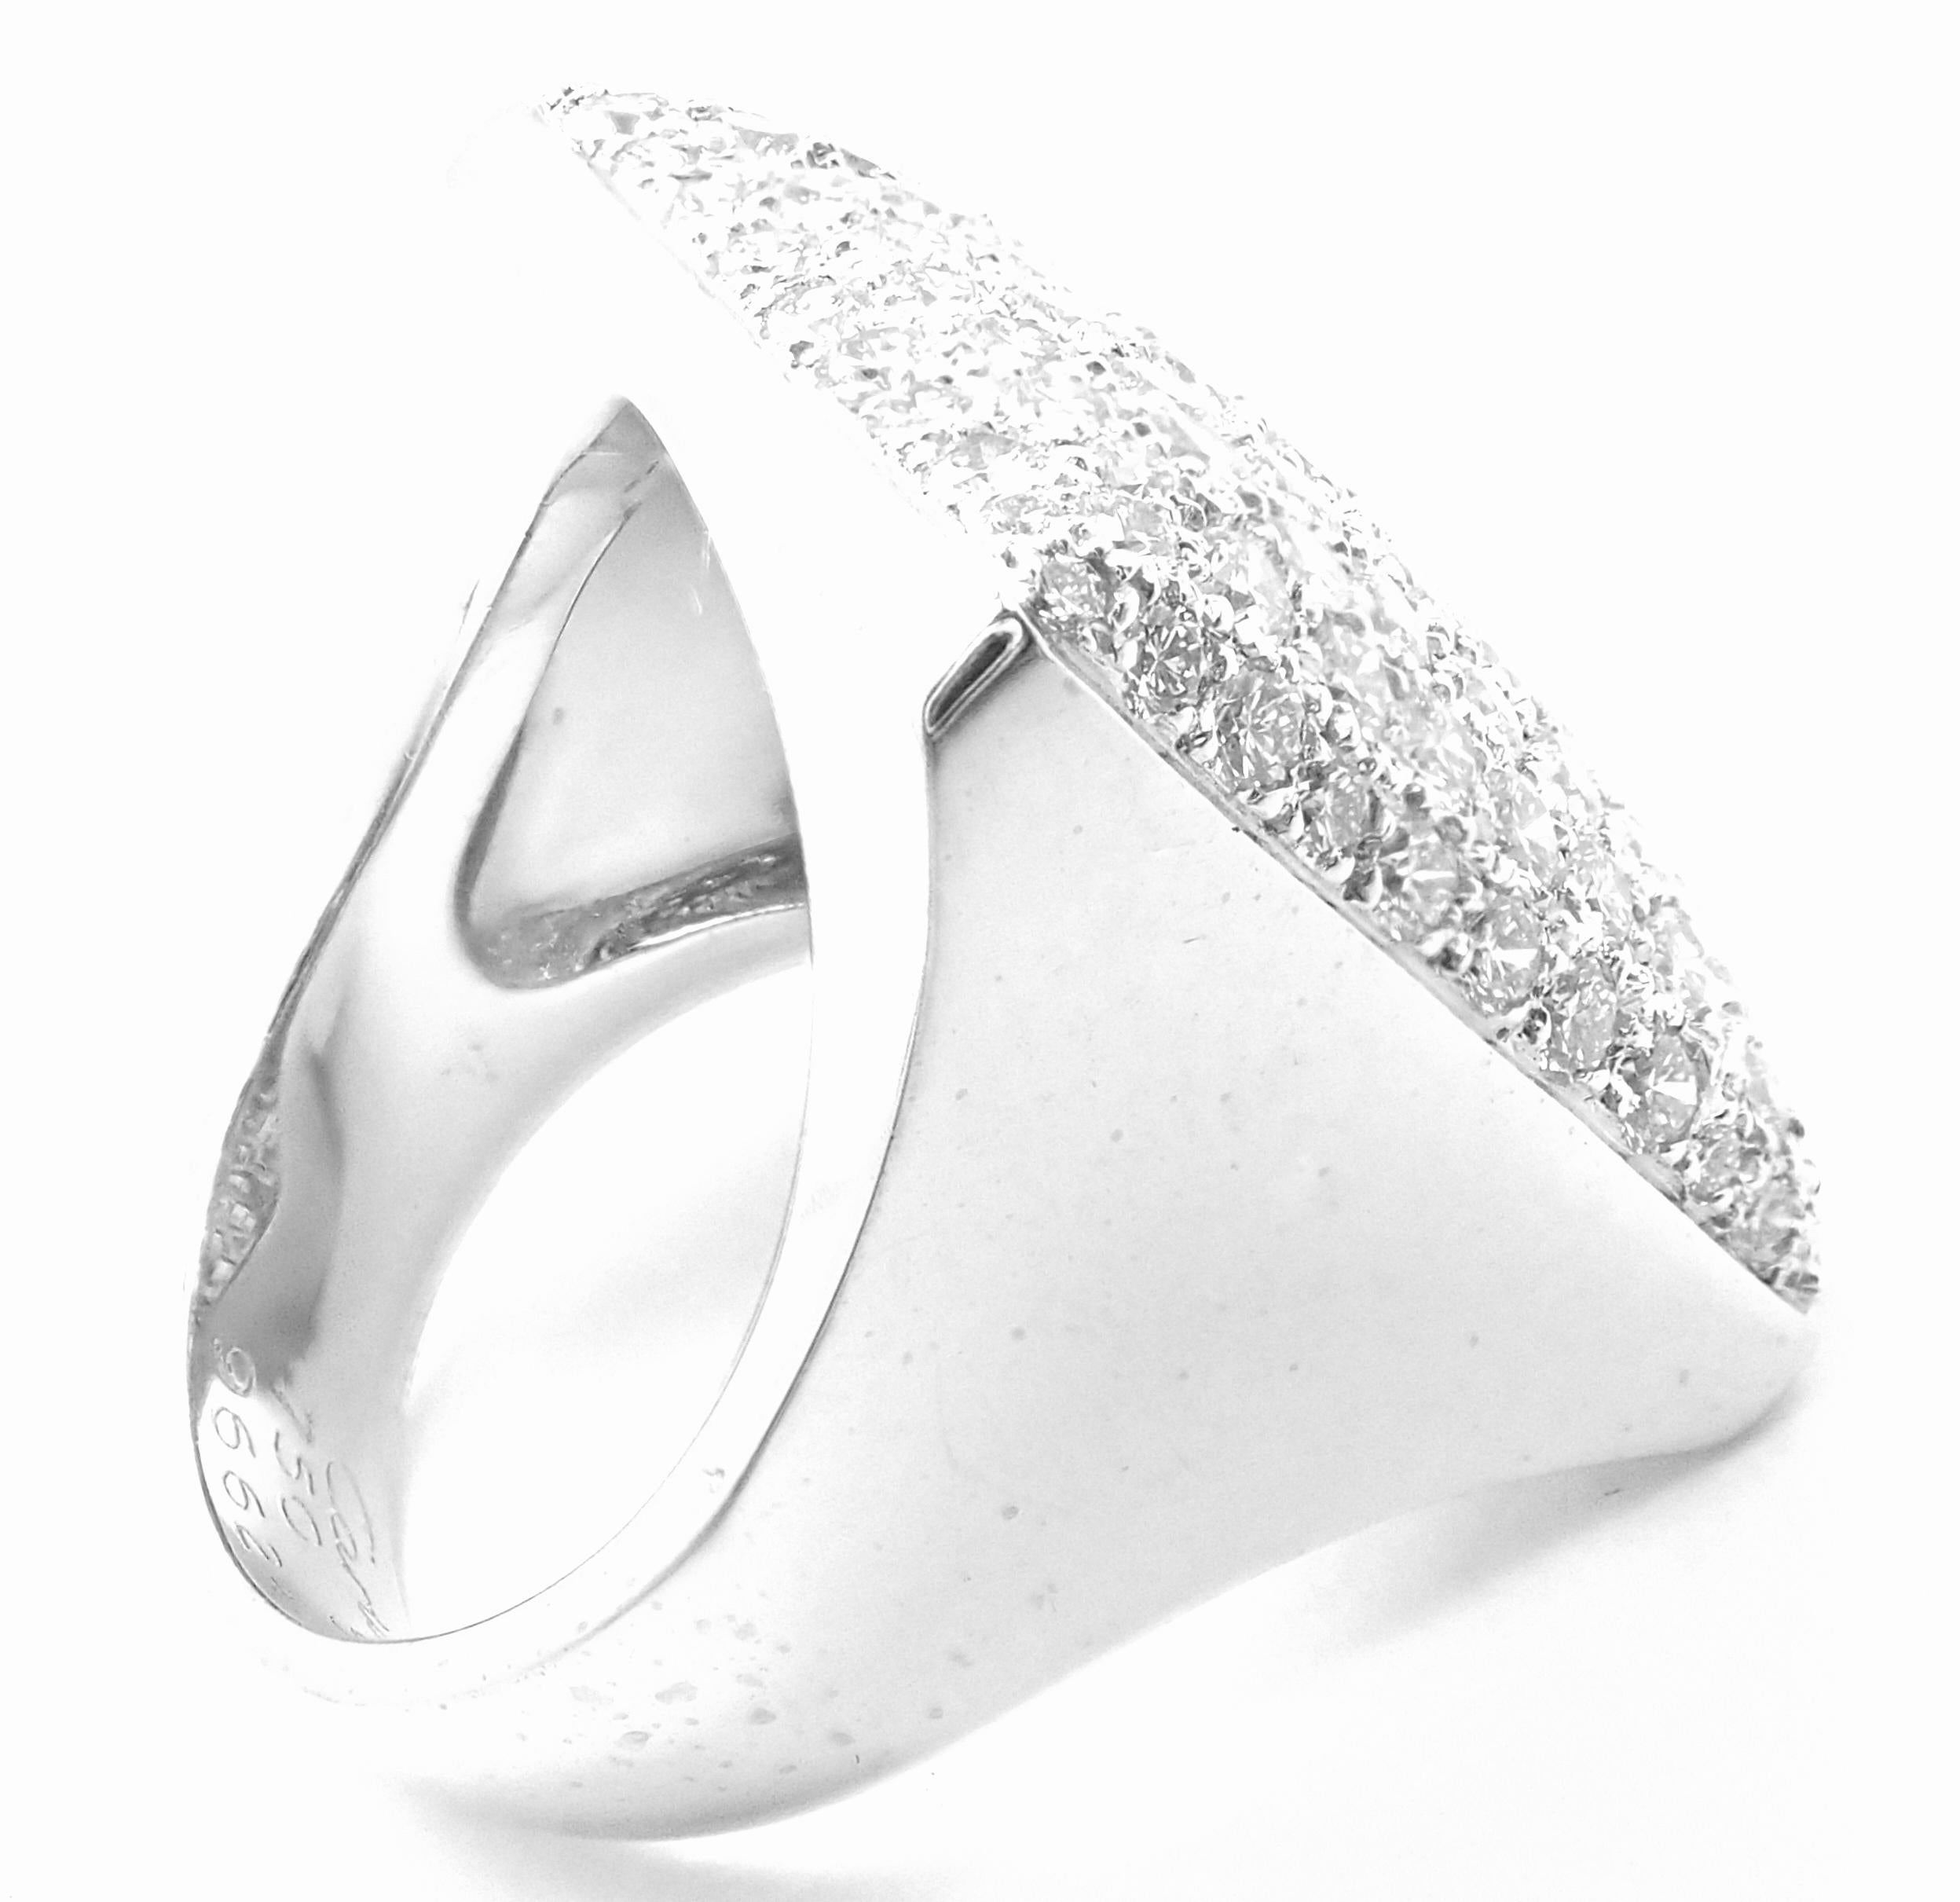 18k White Gold Diamond Square Pave Diamond Large Ring by Cartier.  
This ring comes with a Cartier box.
With Round brilliant cut diamonds VVS1 clarity, E color total weight approximately 3.5ct
Details: 
Ring Size: European 53 US 6.25
Weight:  16.4